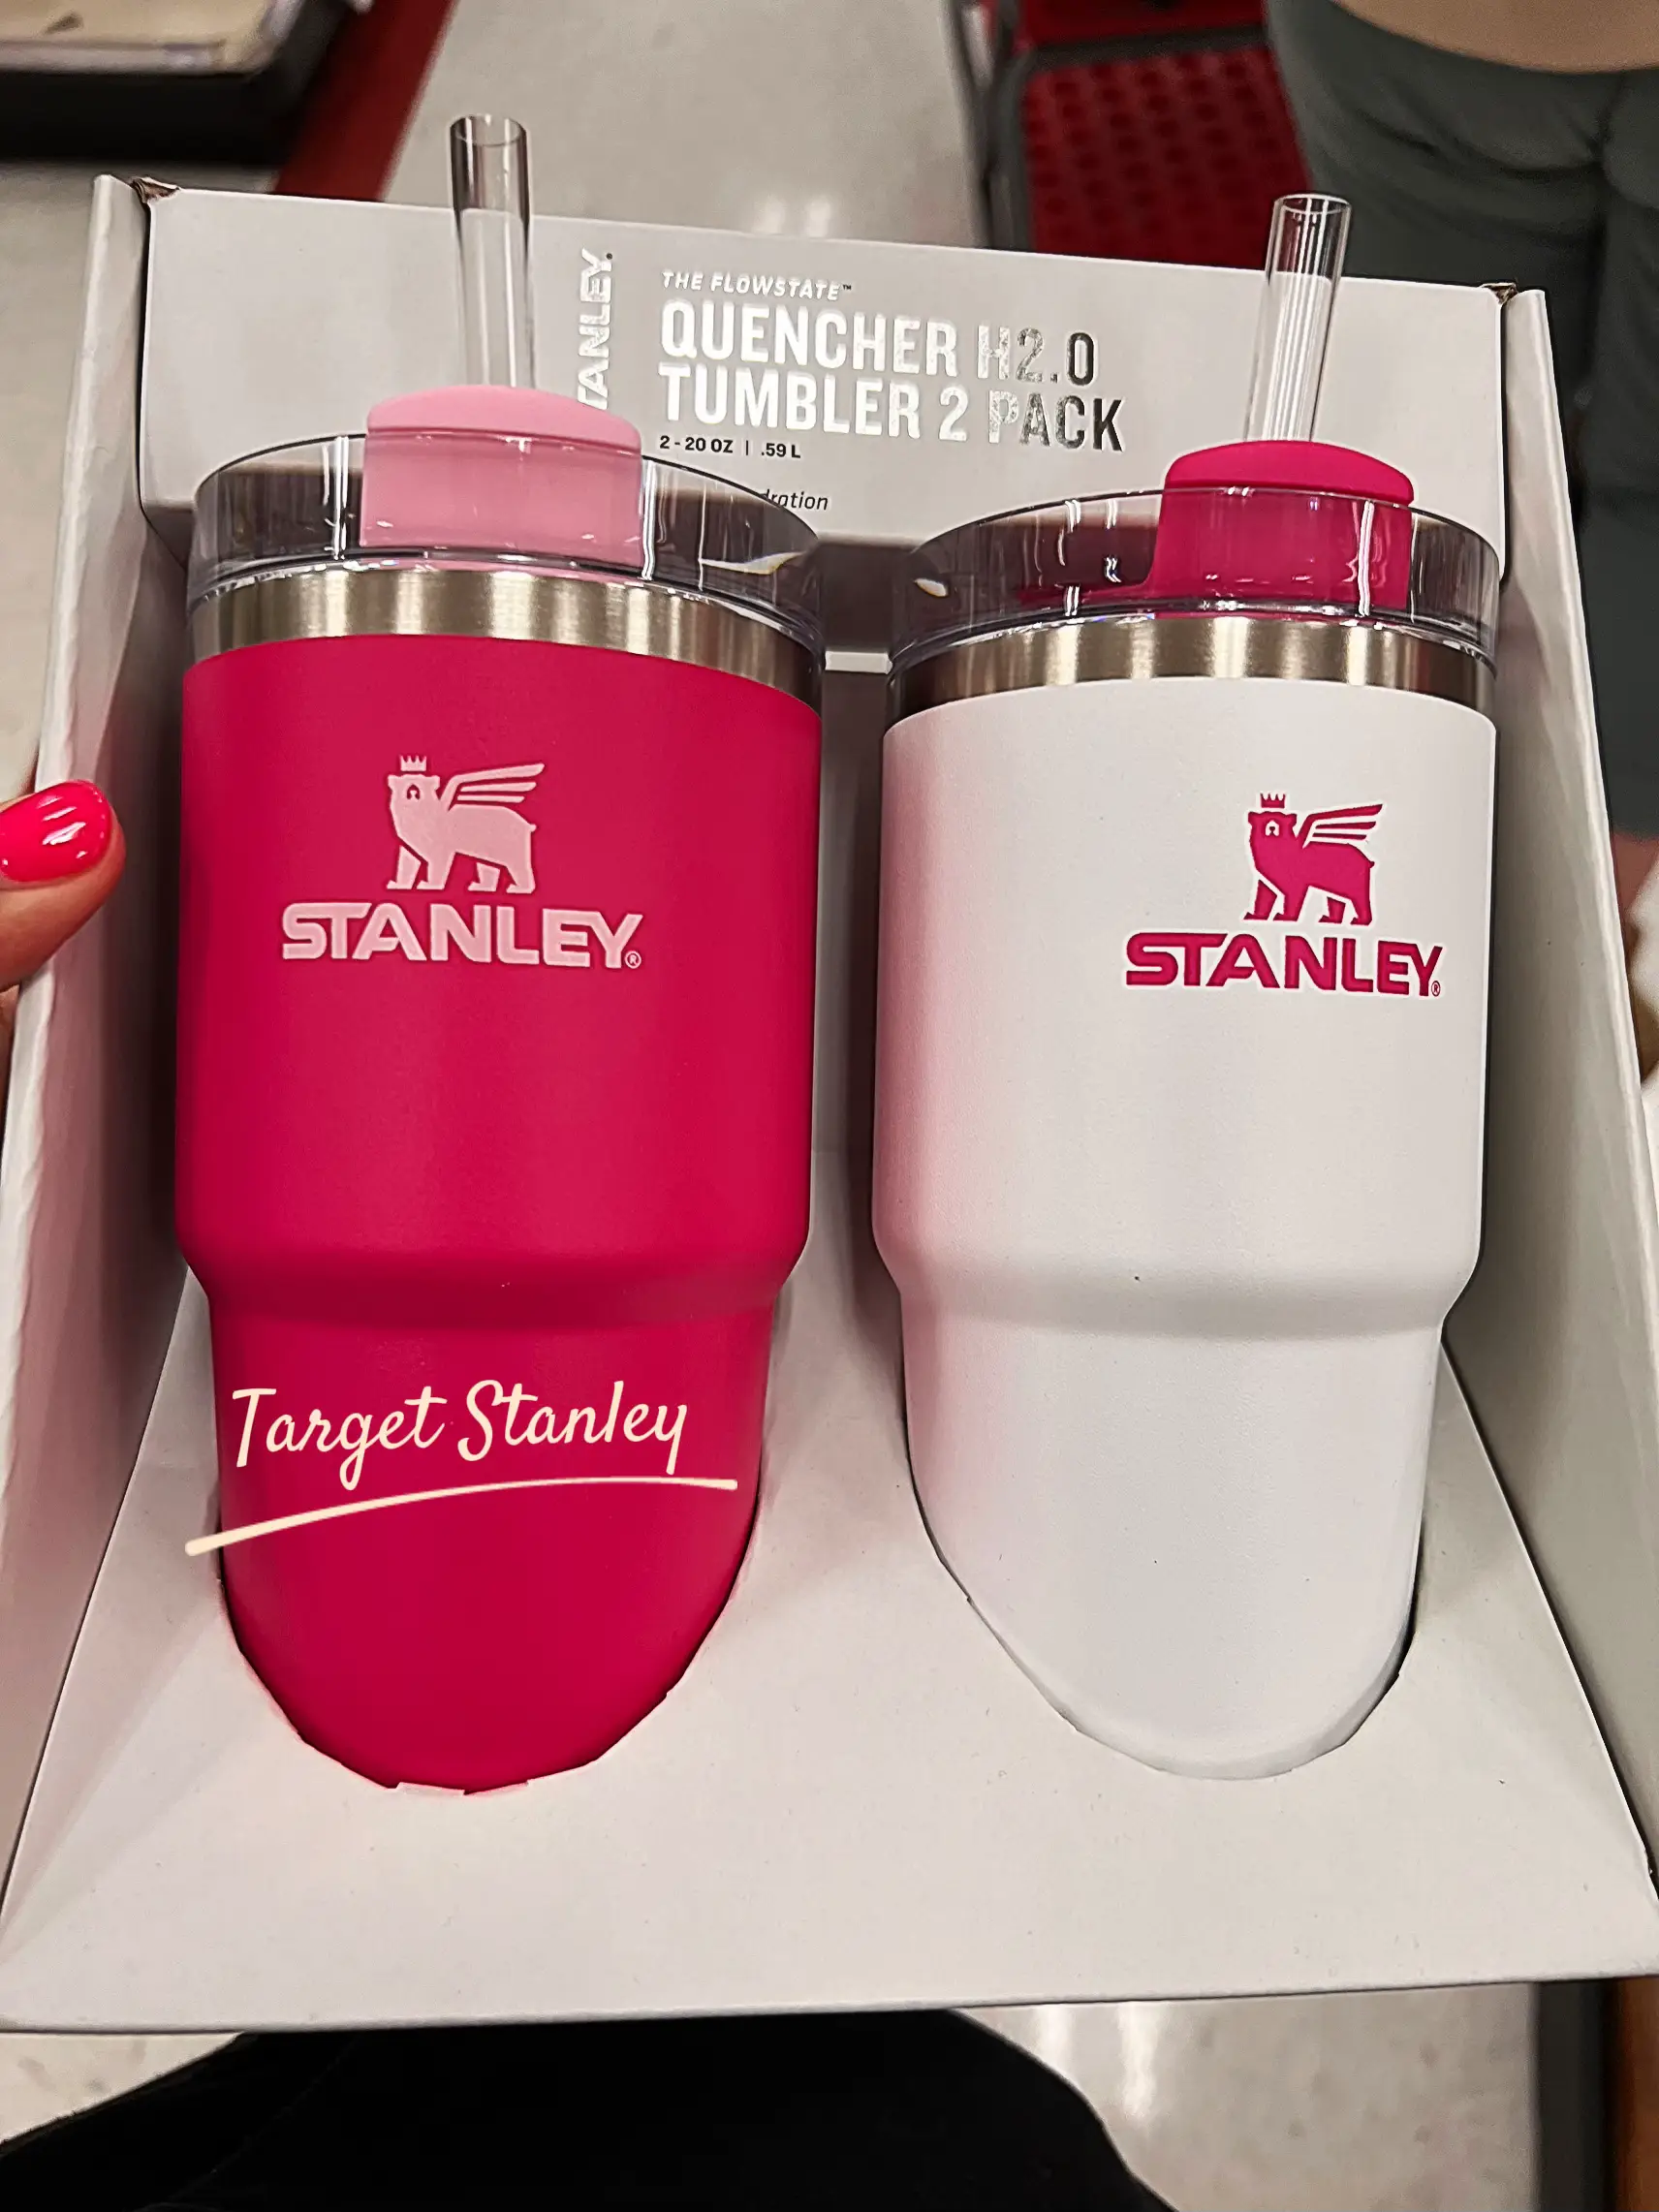 Target Stanley, Gallery posted by cici✨